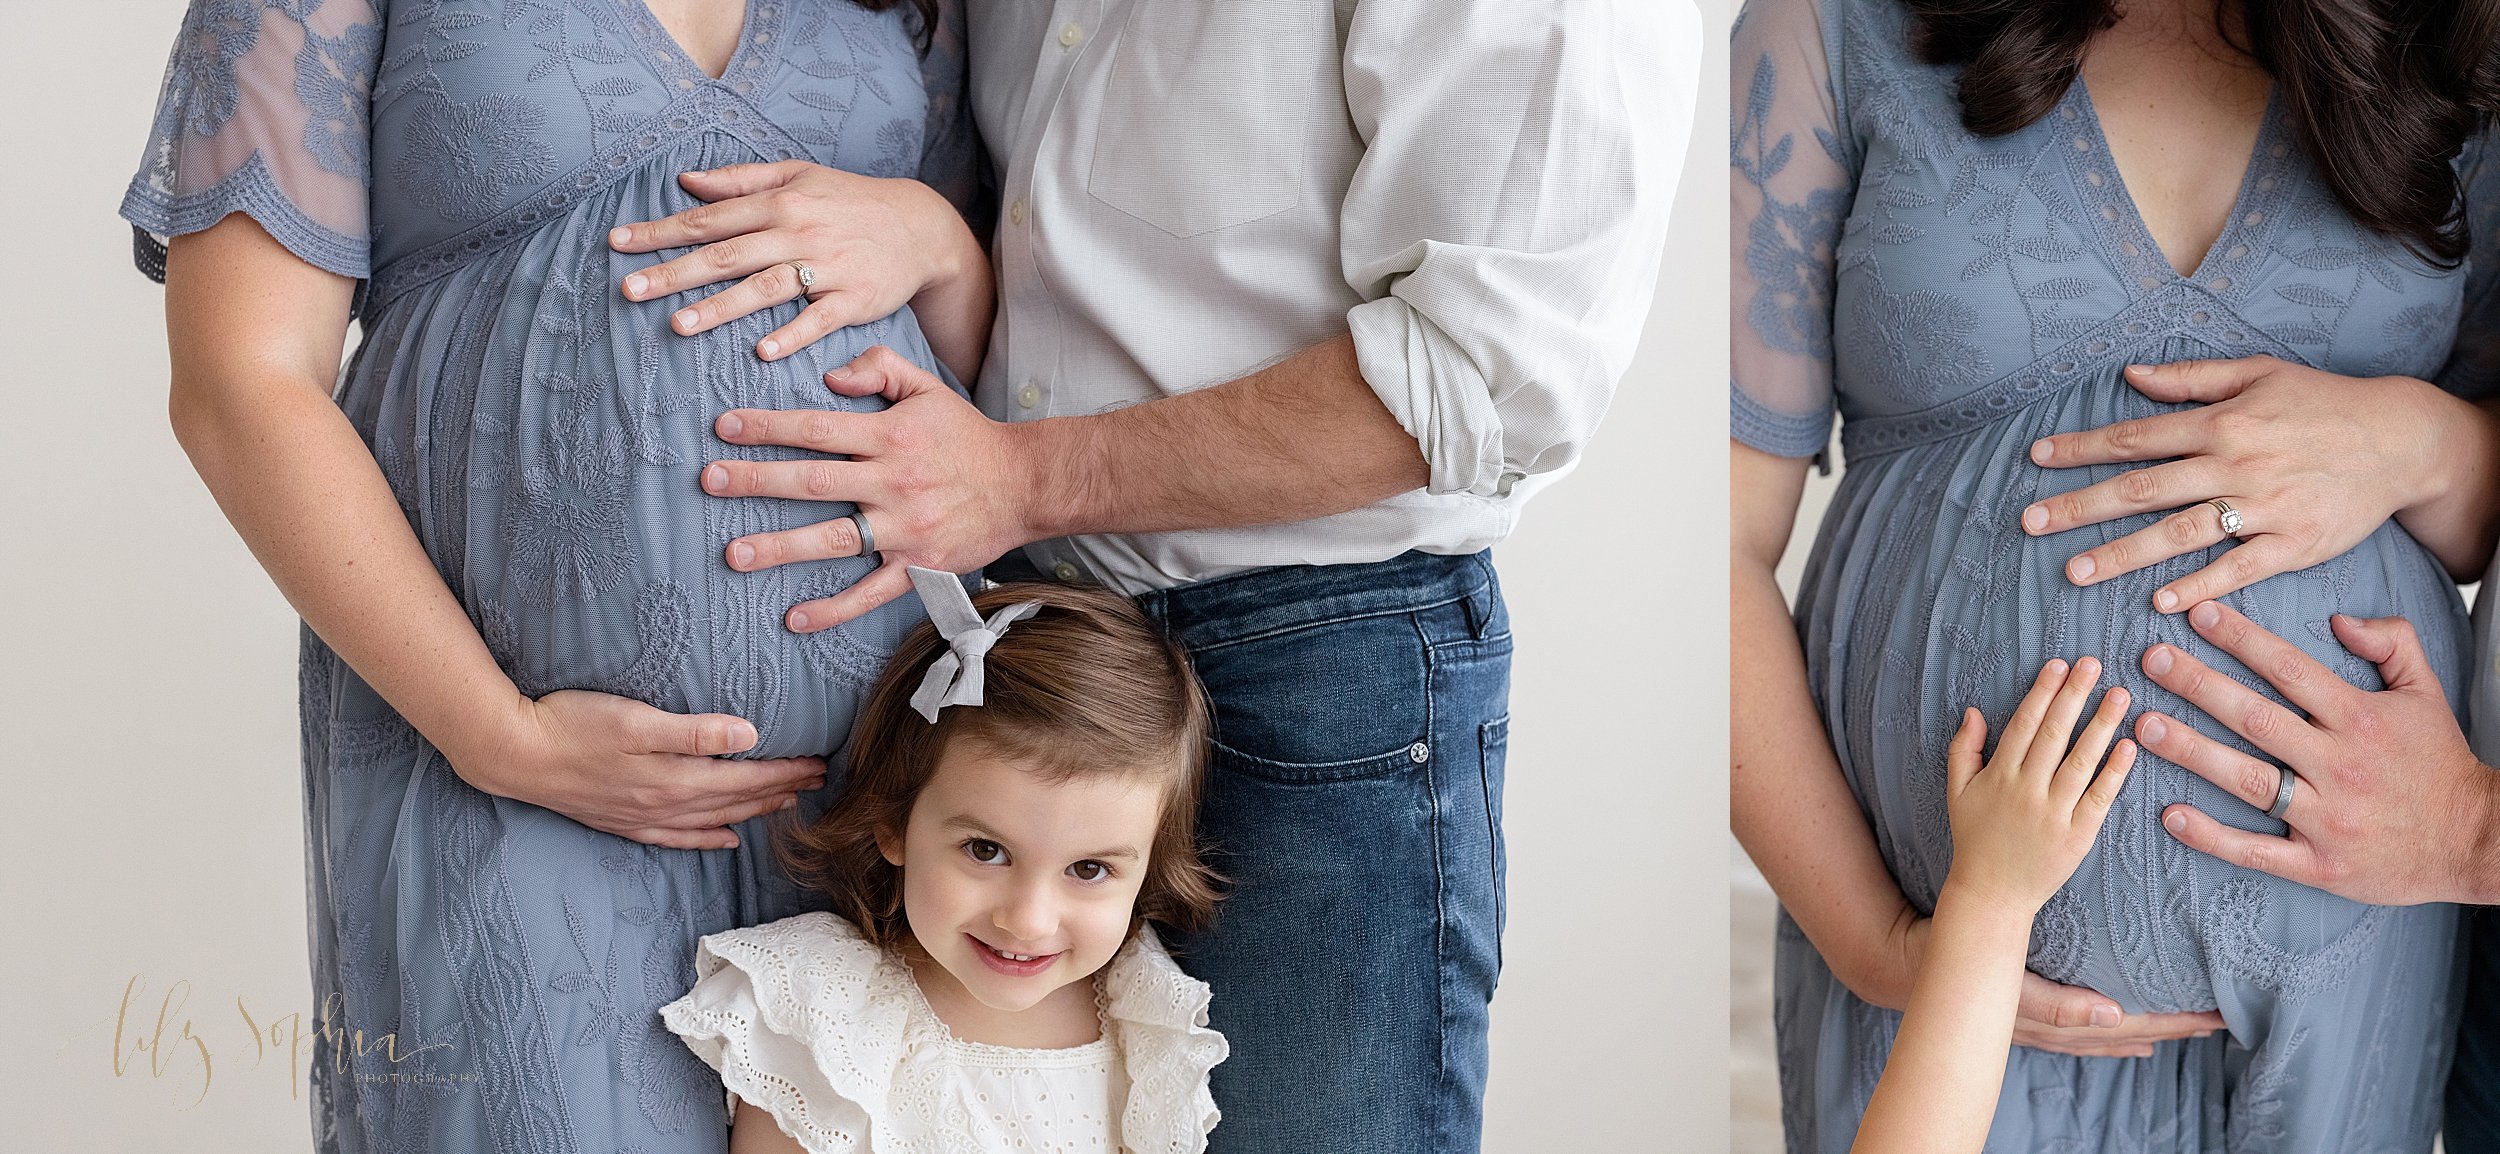  Split-image family maternity photograph of an expectant couple standing next to one another with their hands on their child in utero while their young daughter stands in front of them and a close-up of the mother’s belly with mom’s, dad’s and sister